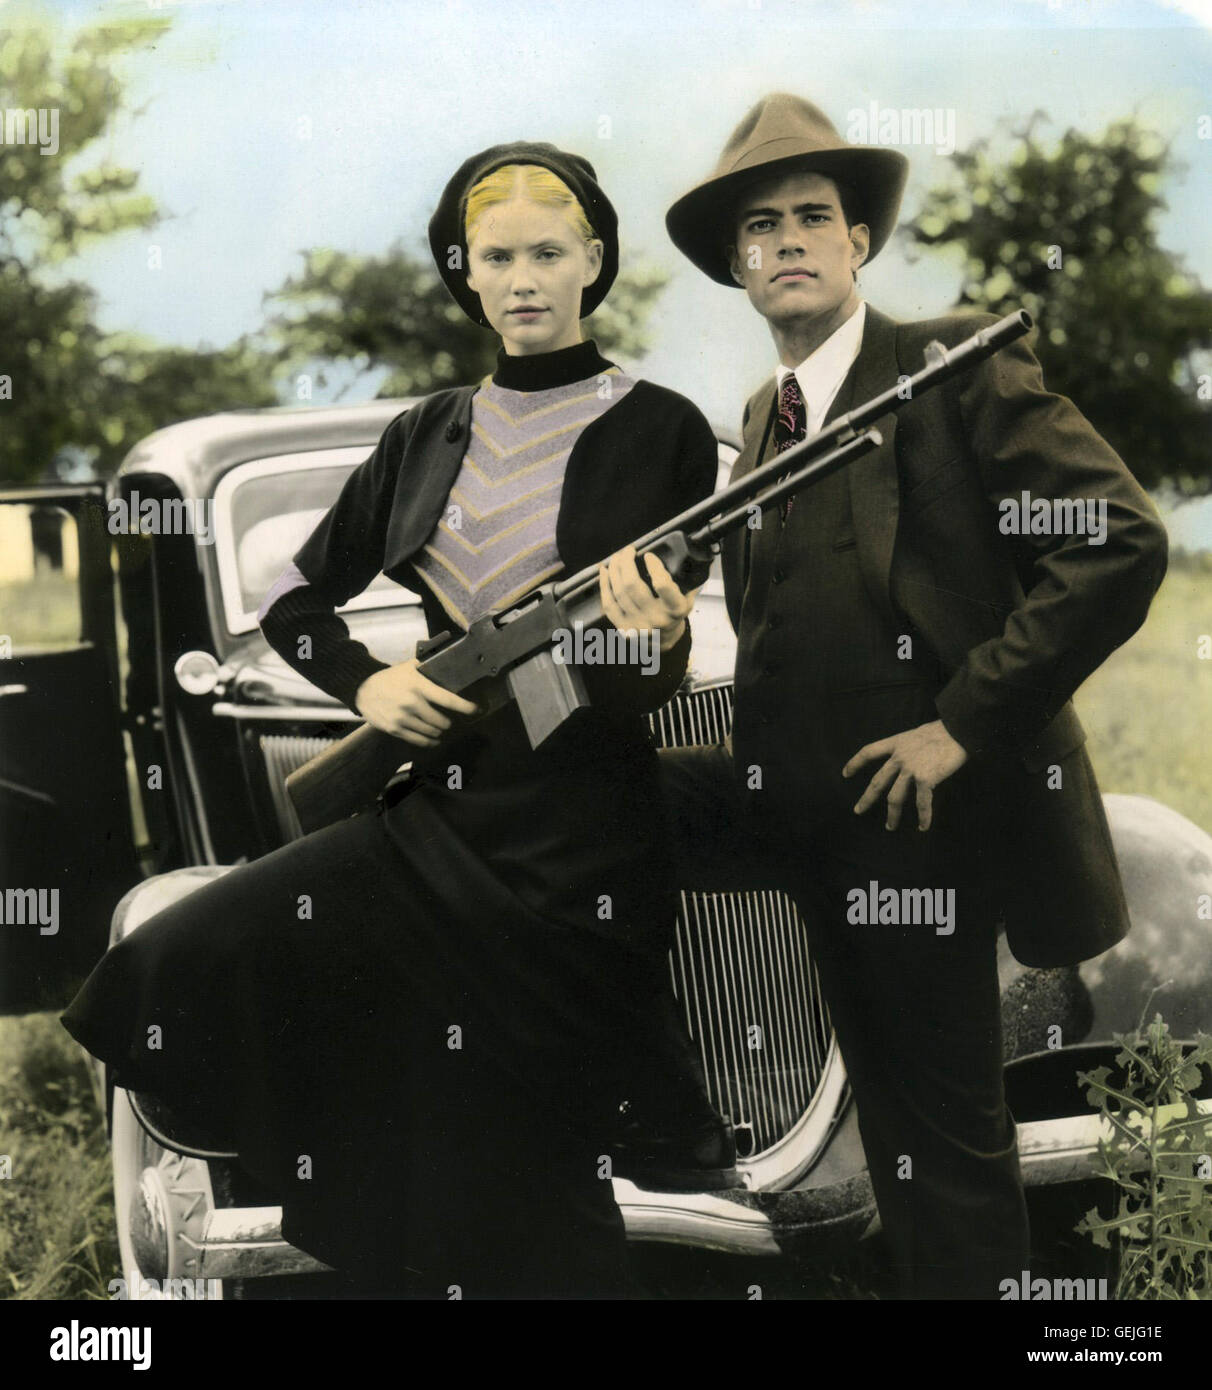 TV Movie 1992 - Tracey Needham as Bonnie Parker and Dana Ashbrook as Clyde Barrow, 1990er, 1990s, Bonnie & Clyde - The True Story, Crime story, Gangsterpaar, Gewehr, Kriminalfilm, Television, couple, gangster, gun, wearing a hat, Bonnie Und Clyde - Wie Es Stock Photo